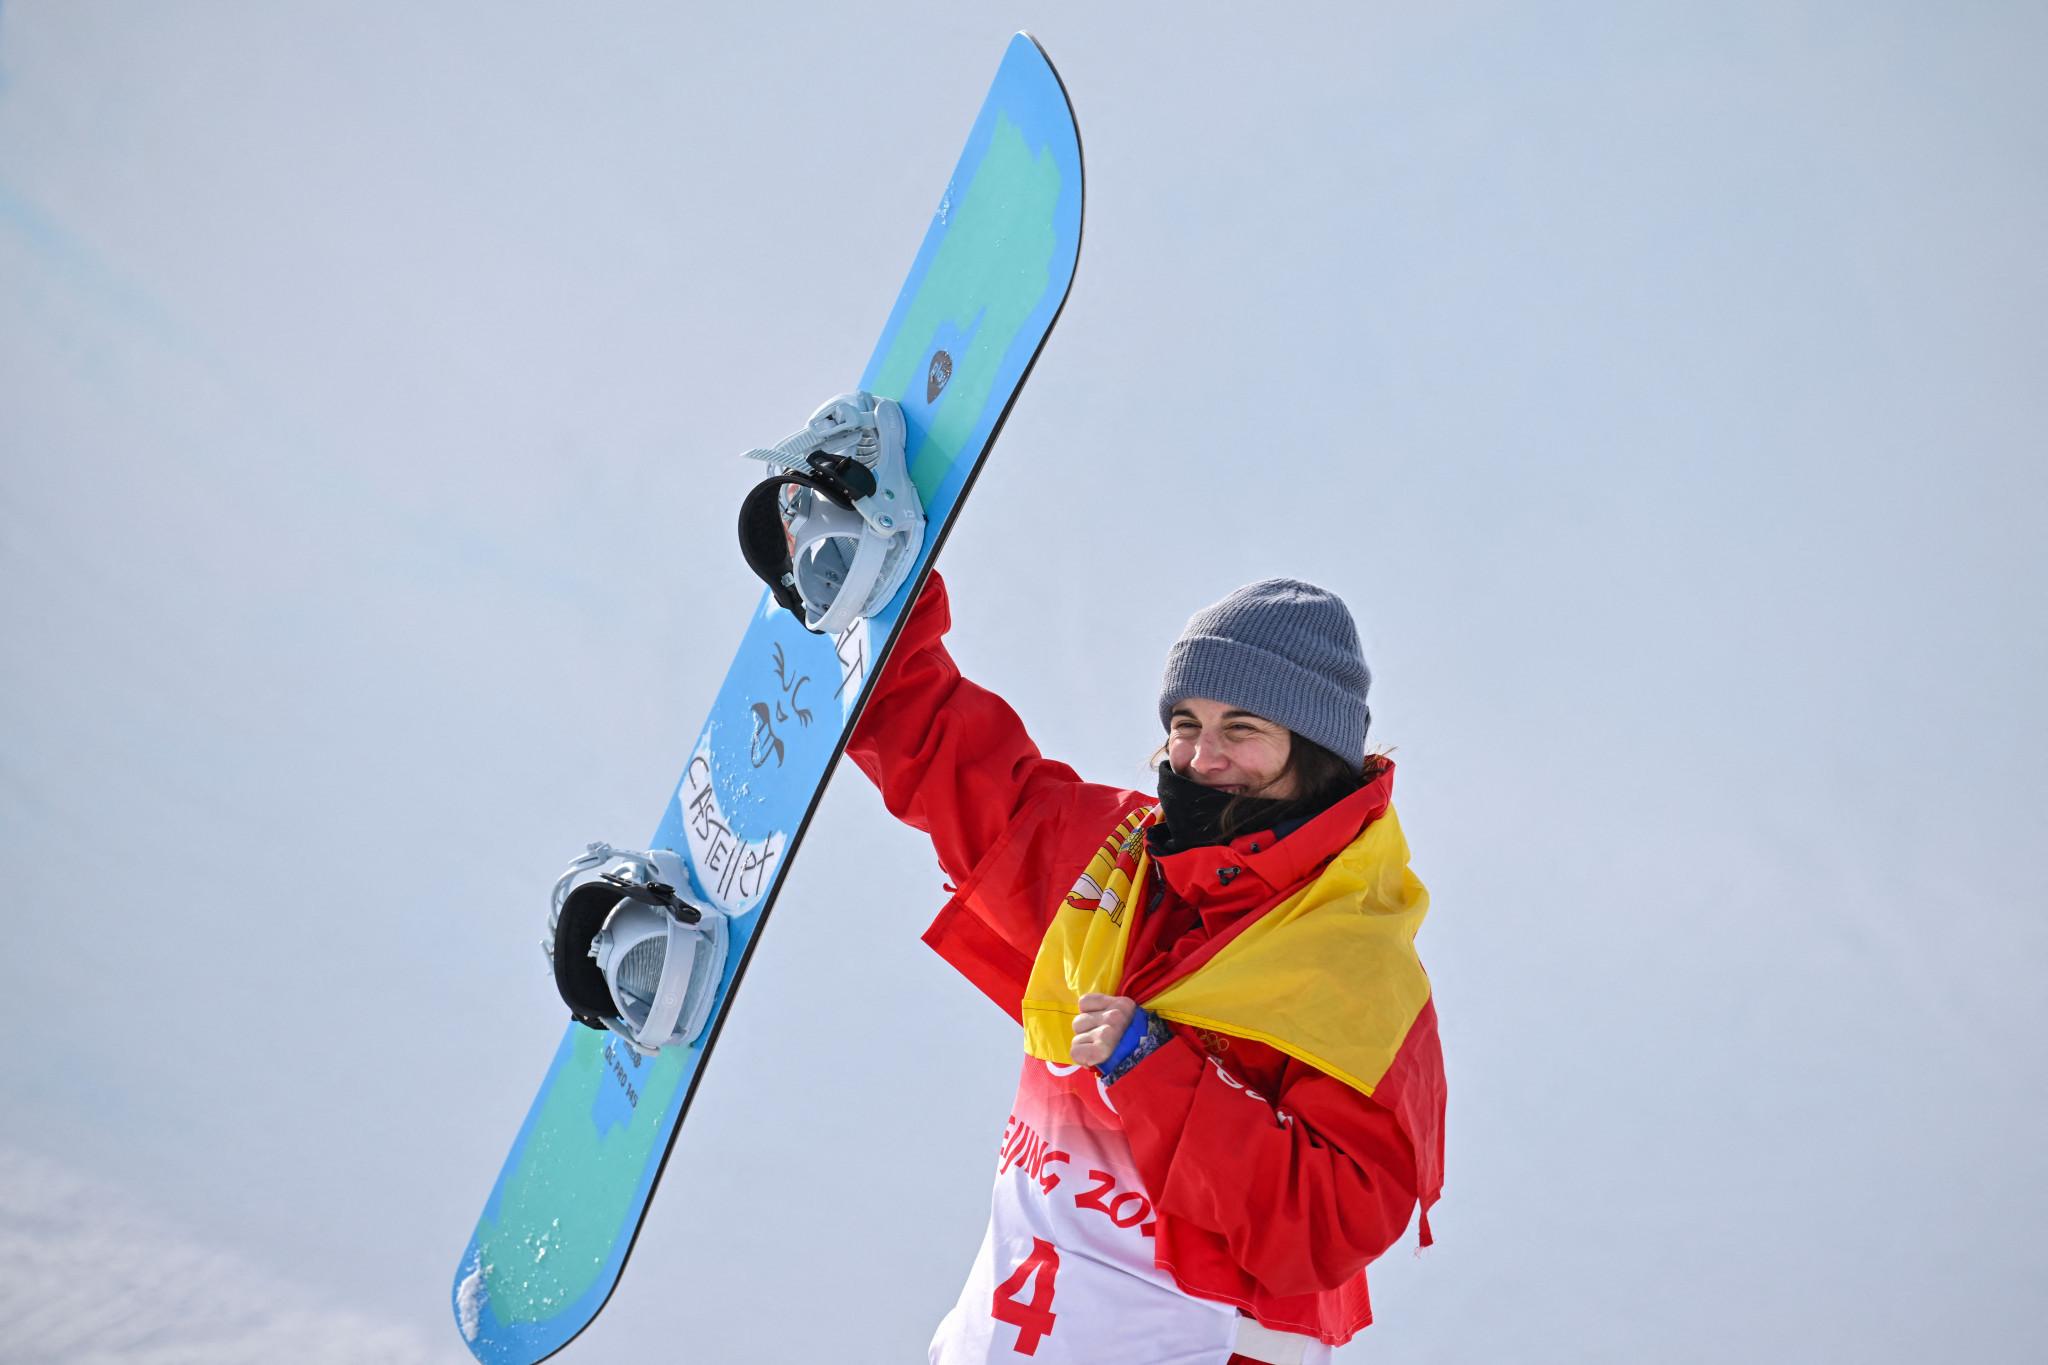 Queralt Castellet won Spain's first medal at the Winter Olympics for 50 years with a strong performance in the second run ©Getty Images